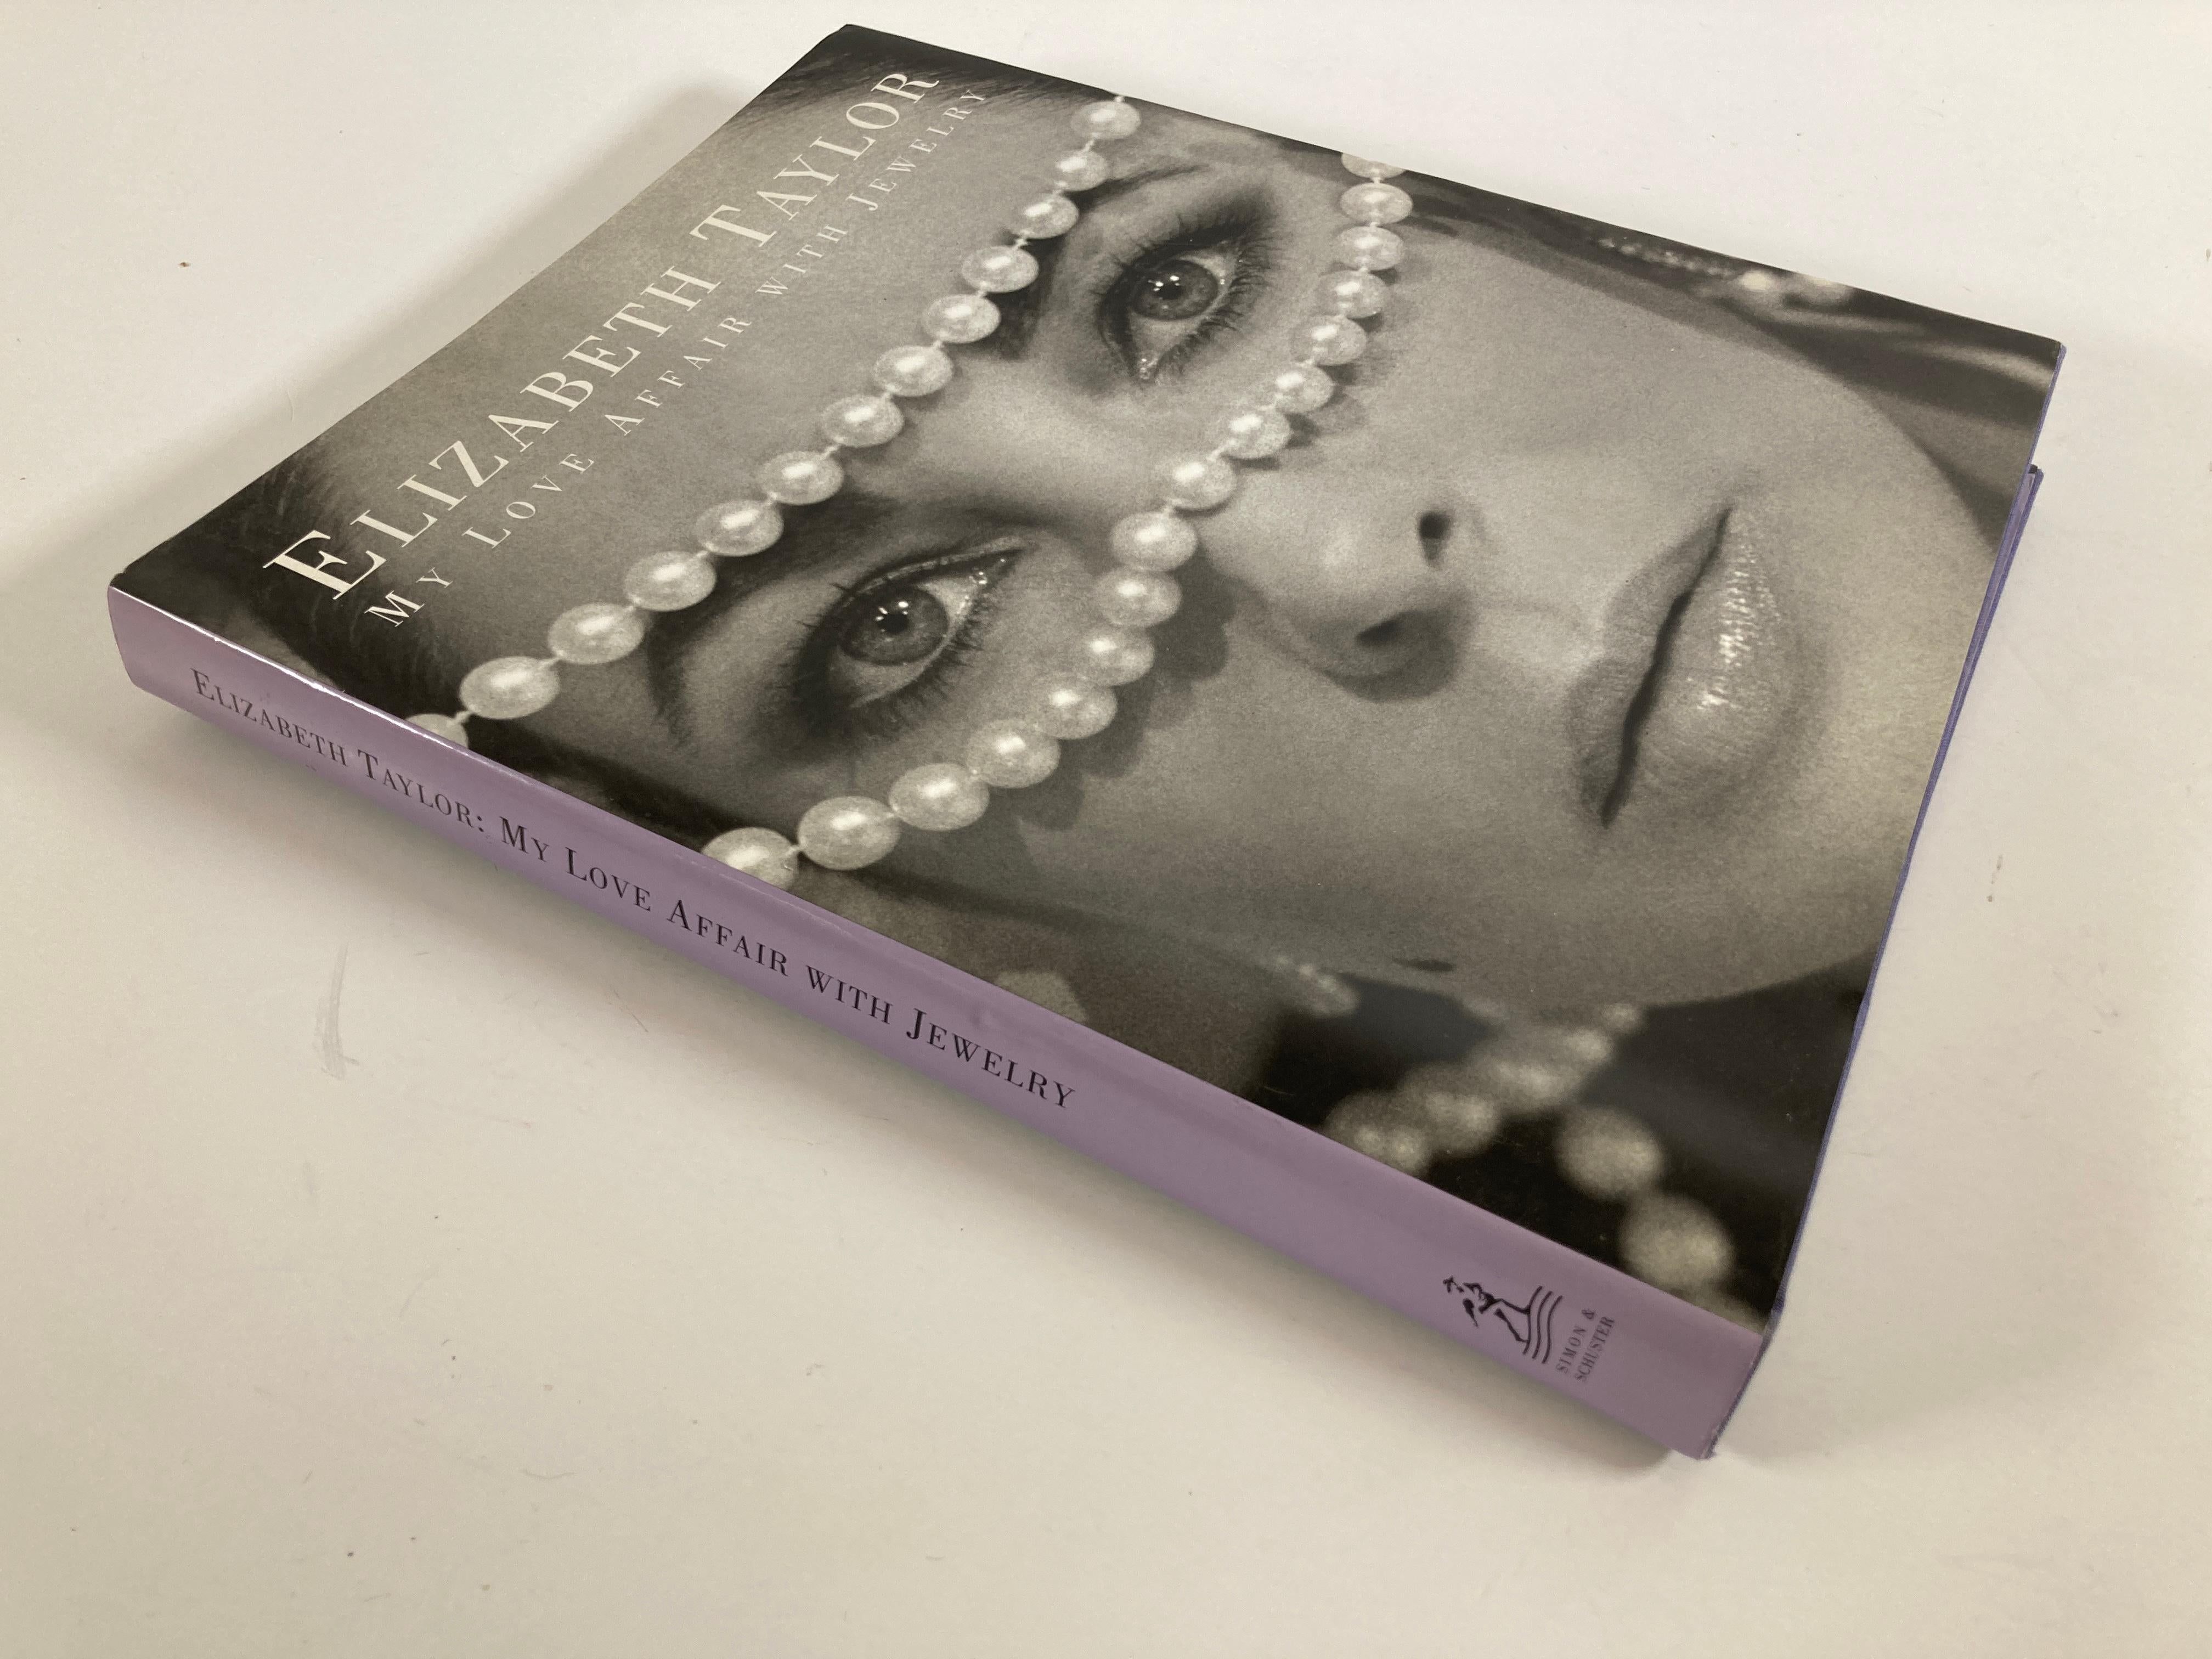 Elizabeth Taylor: My Love Affair with Jewelry Table Book
Elizabeth Taylor was born in London on February 27, 1932. At age 3, she already had extensive ballet training and danced for British princesses Elizabeth and Margaret Rose at London's